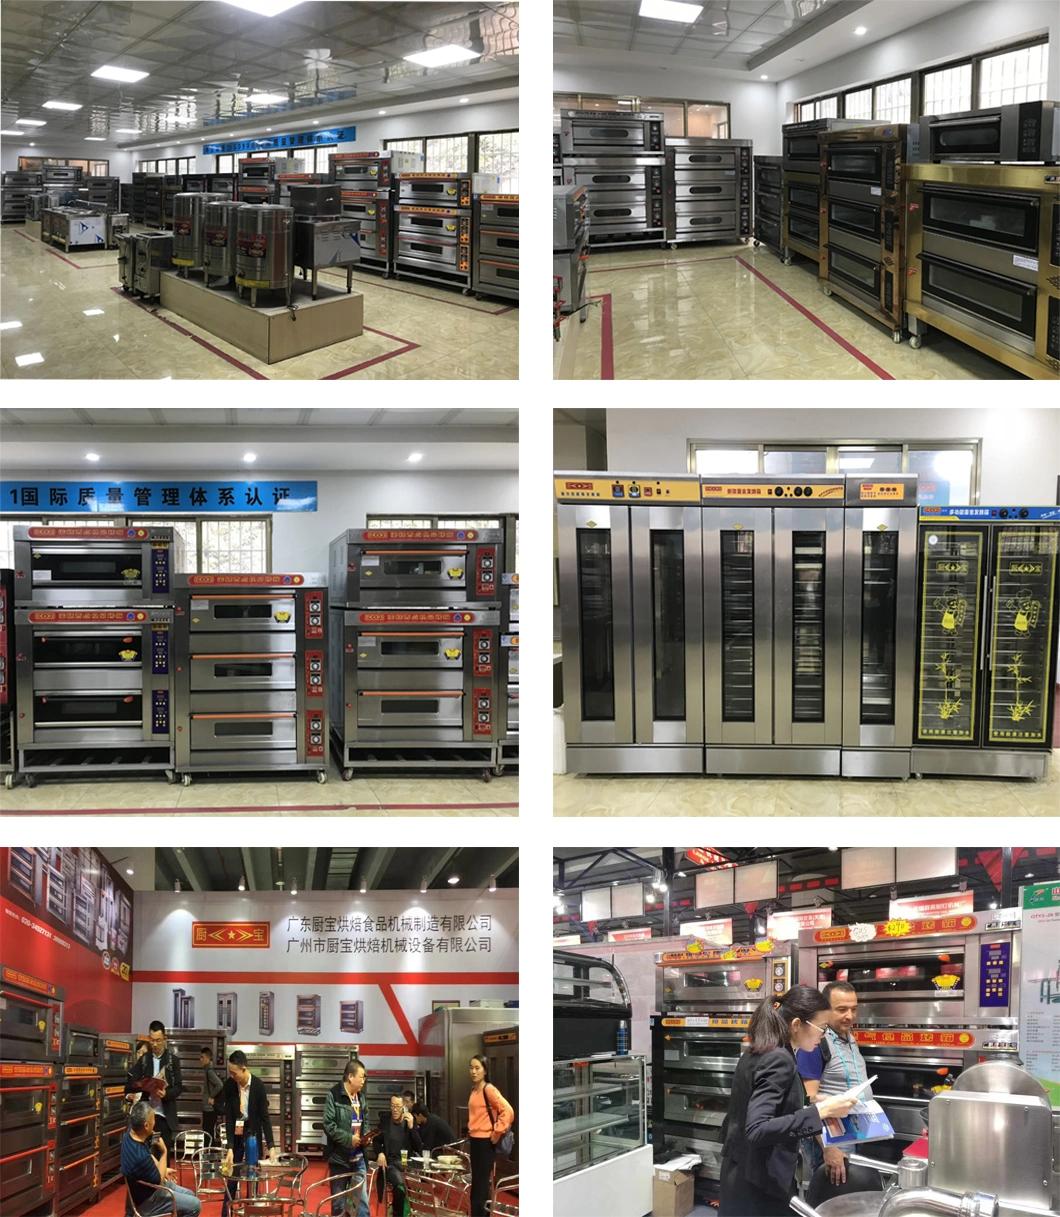 Commercial Kitchen 3 Deck 9 Trays Gas Oven for Baking Equipment Bakery Machinery Food Machine